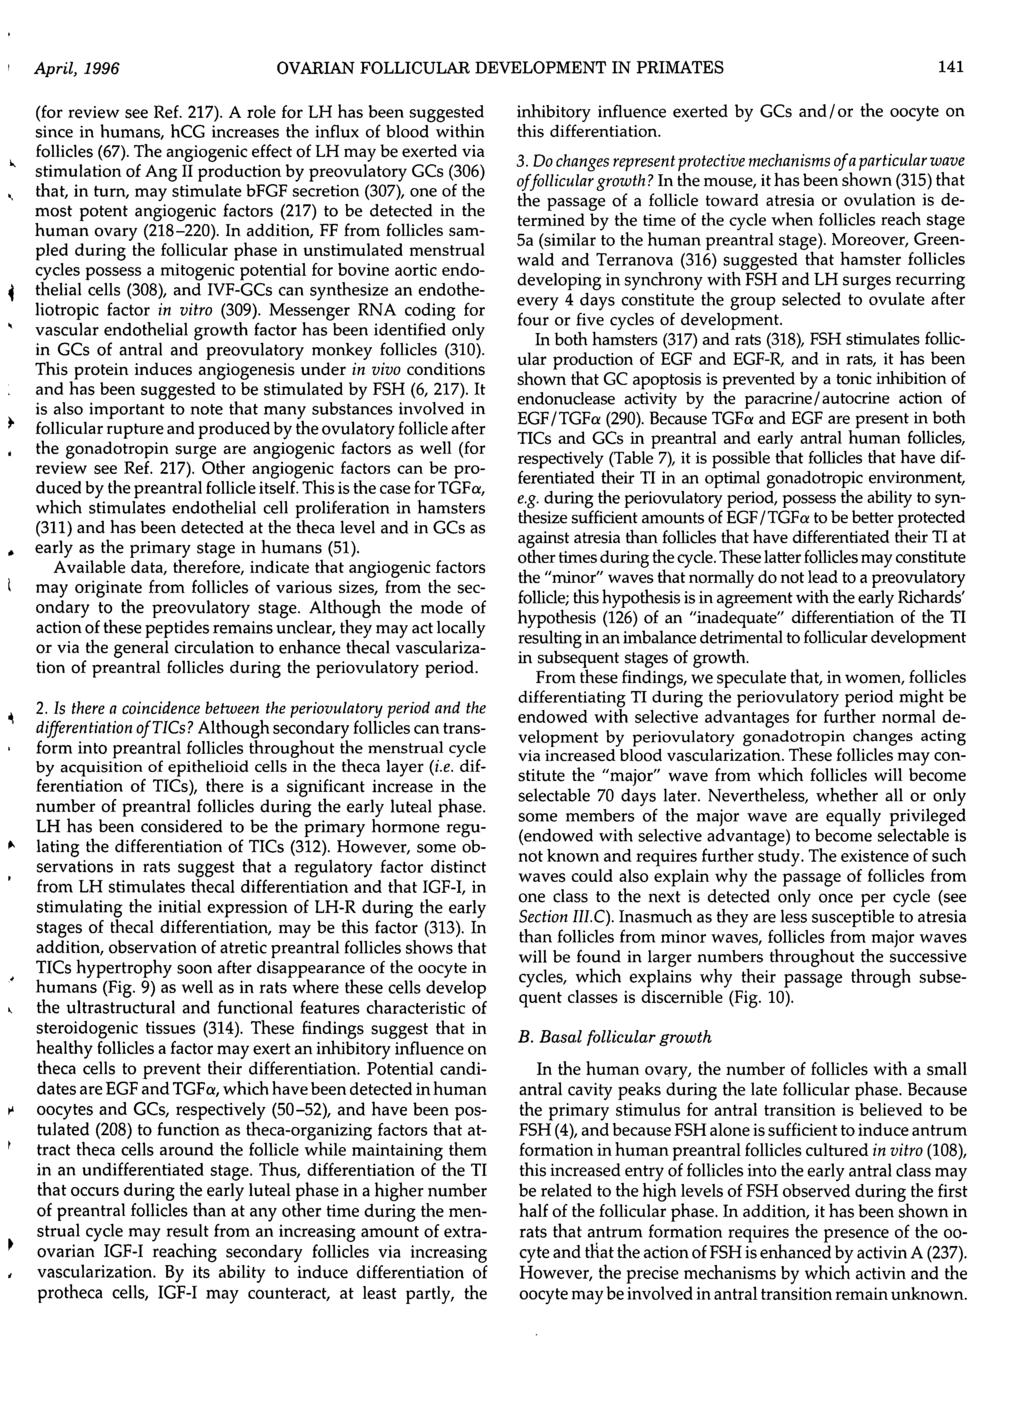 April, 1996 OVARIAN FOLLICULAR DEVELOPMENT IN PRIMATES 141 (for review see Ref. 217). A role for LH has been suggested since in humans, hcg increases the influx of blood within follicles (67).